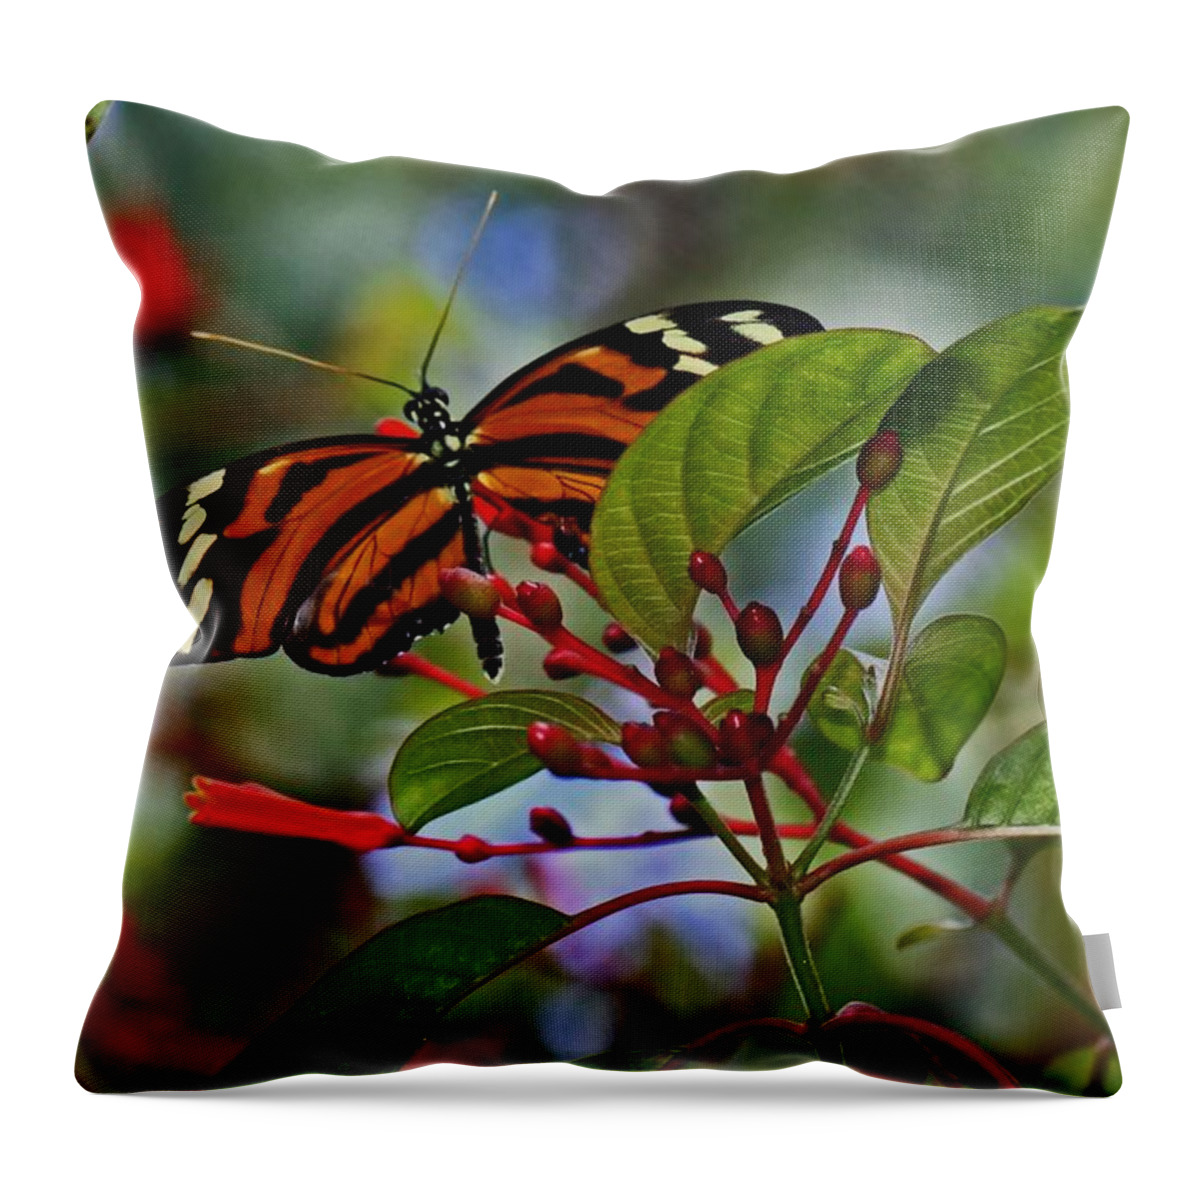 Black Throw Pillow featuring the photograph Danaidae Butterfly by Suzanne Stout